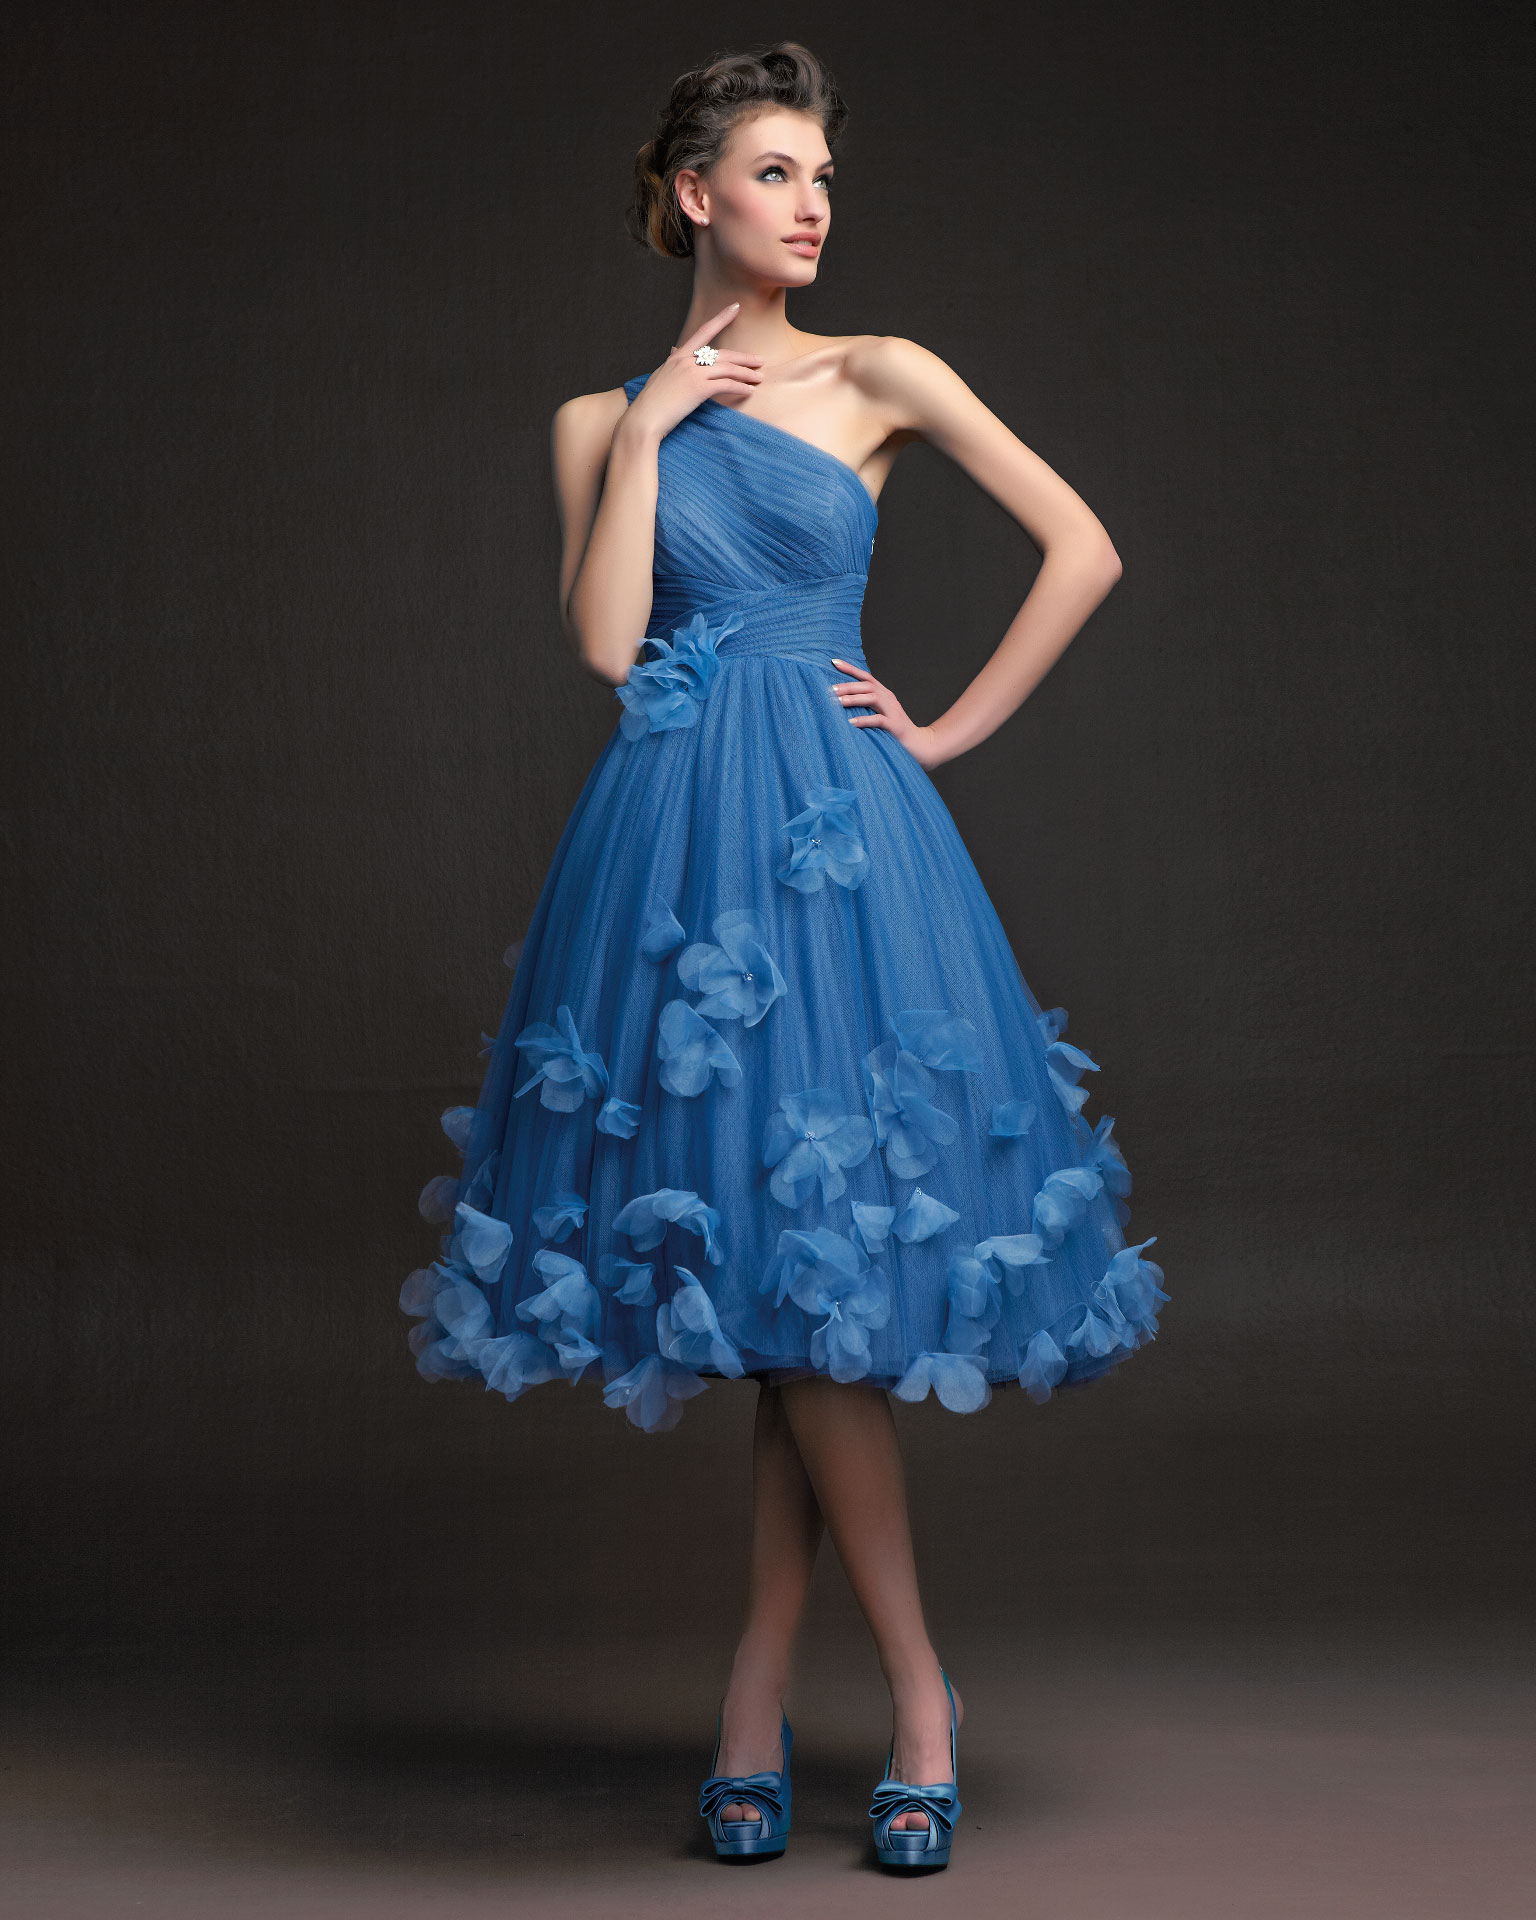 Simple A-line One Shoulder Ruching Hand Made Flowers Knee-length Tulle Cocktail Dress